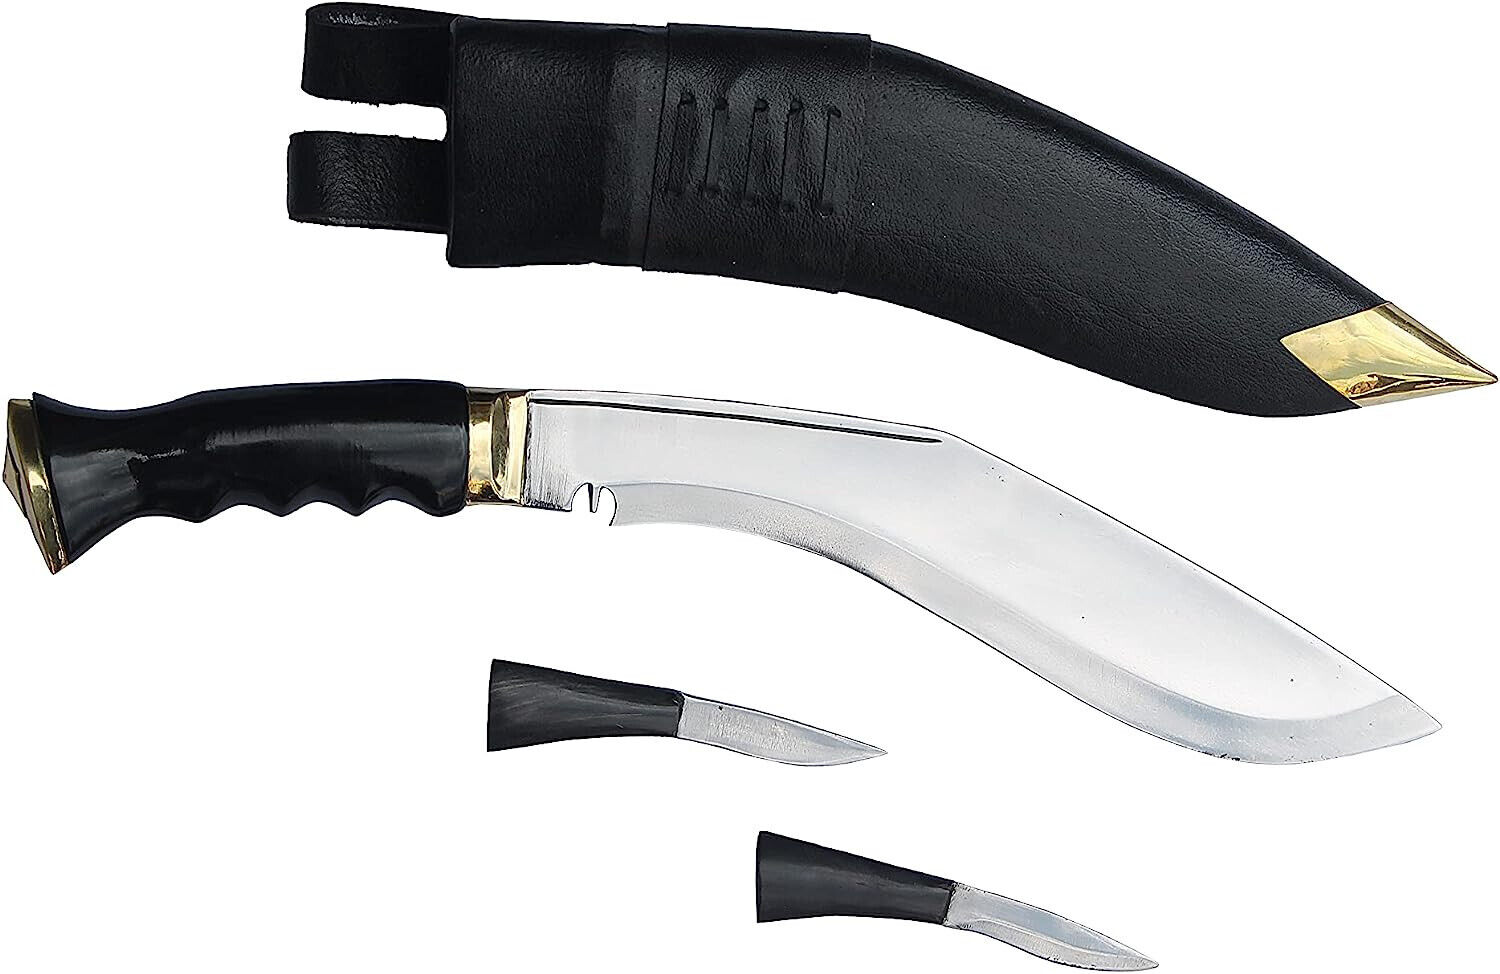 HANDMADE KUKRI KNIFE -10.5 INCH CARBON STEEL BLADE and 5 INCH HORN HANDLE